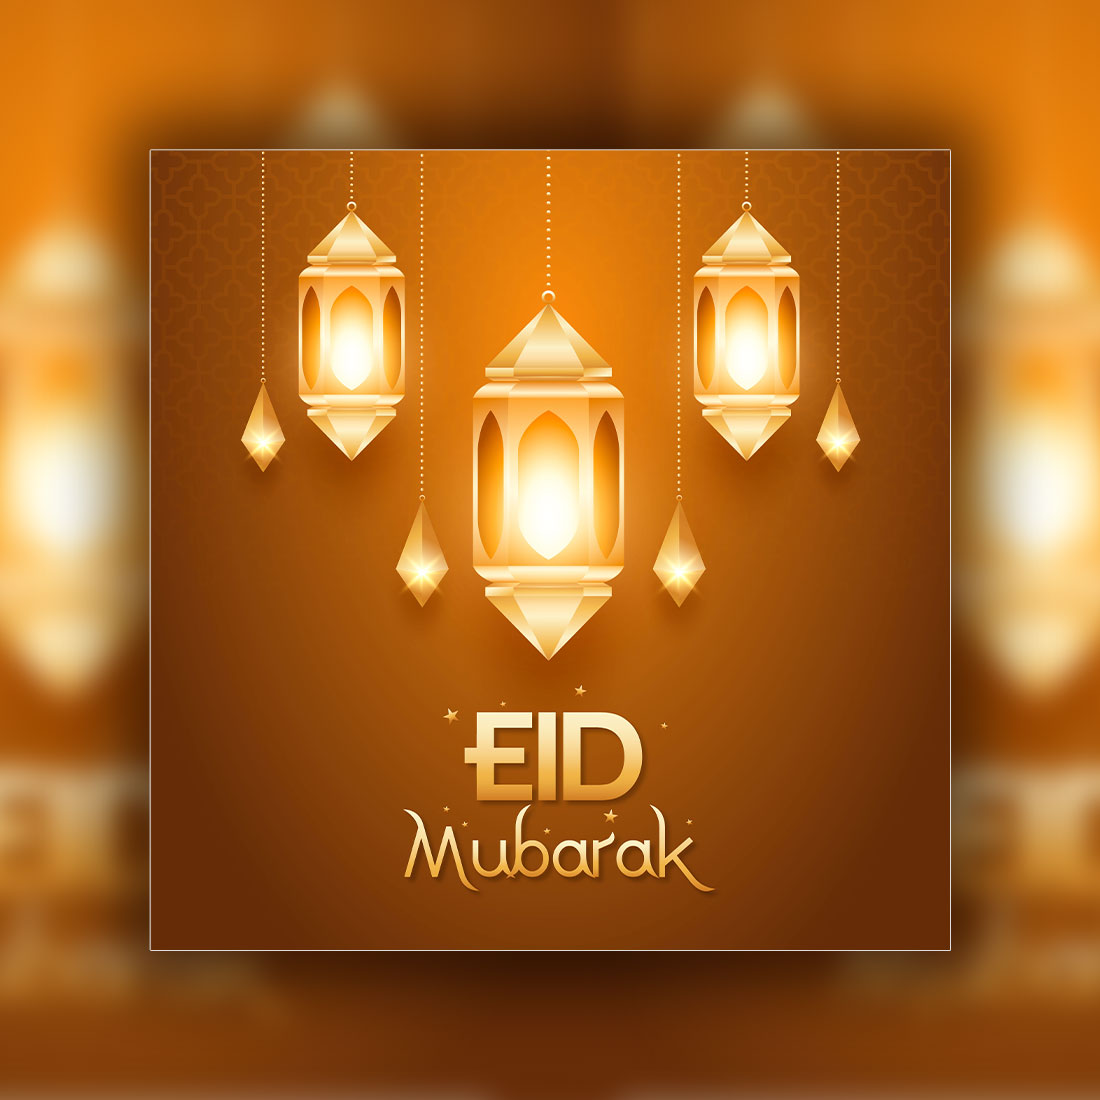 Eid Greetings Social Media Post Design with Islamic background and Lamp cover image.